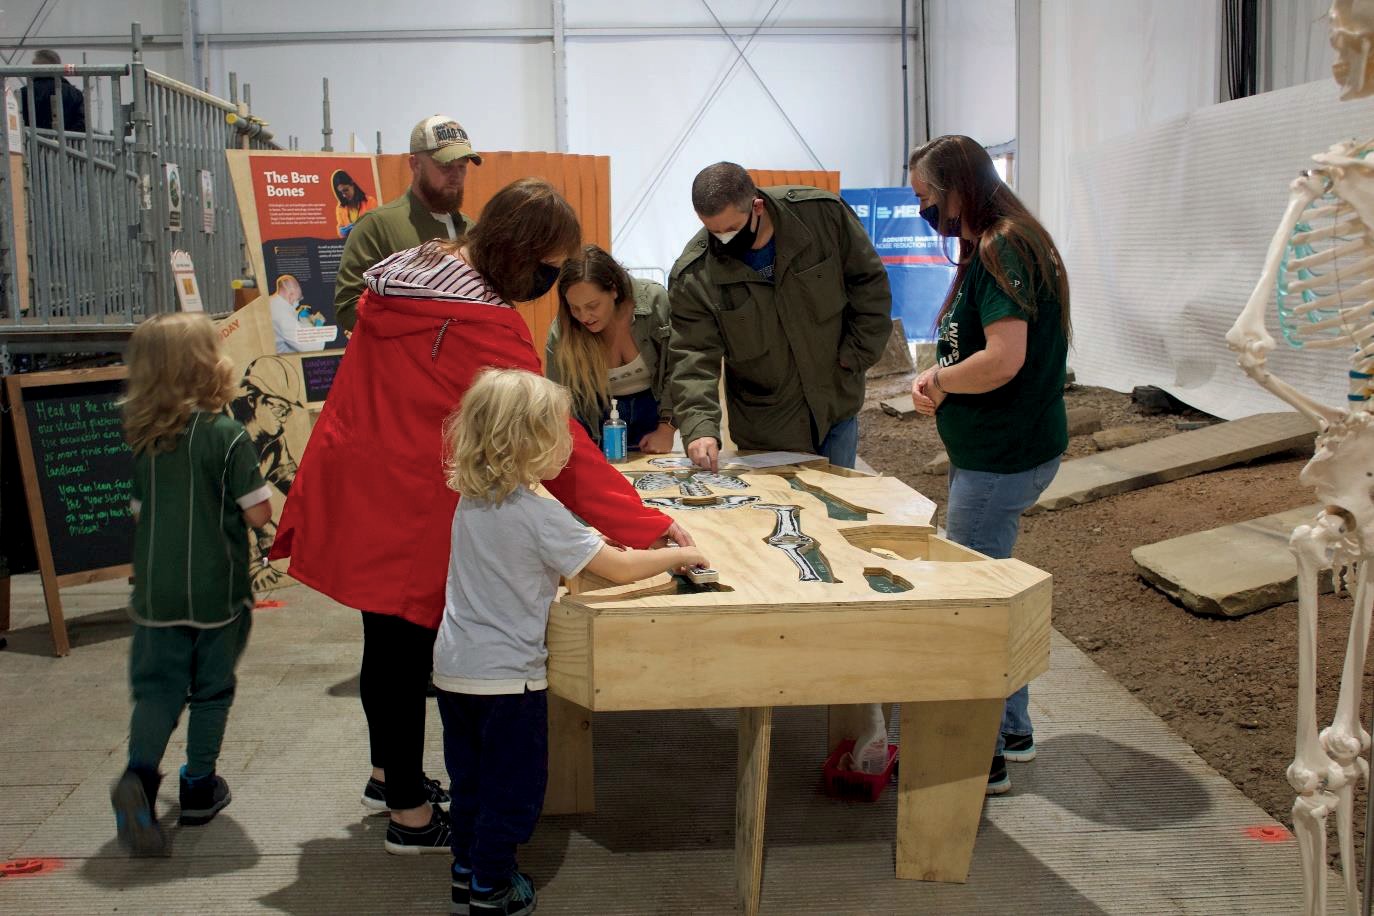  Image of the skeleton puzzle table being enjoyed by people of several ages.